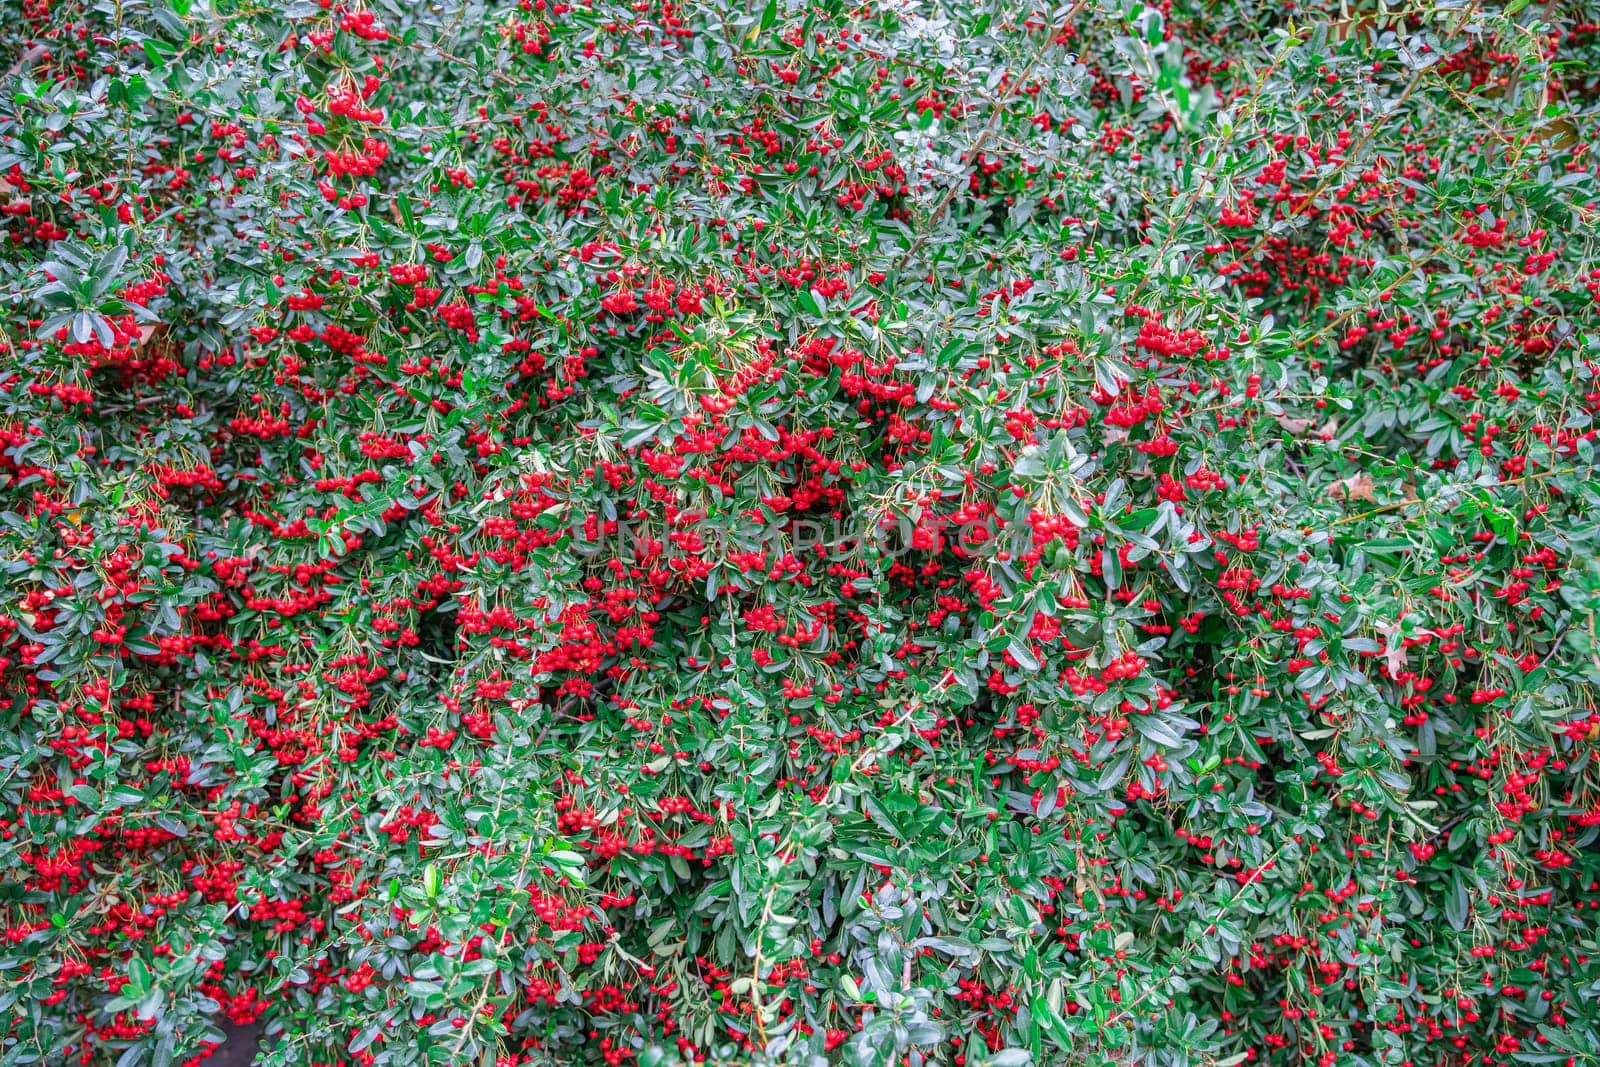 A barberry bush with berries in close-up by roman112007